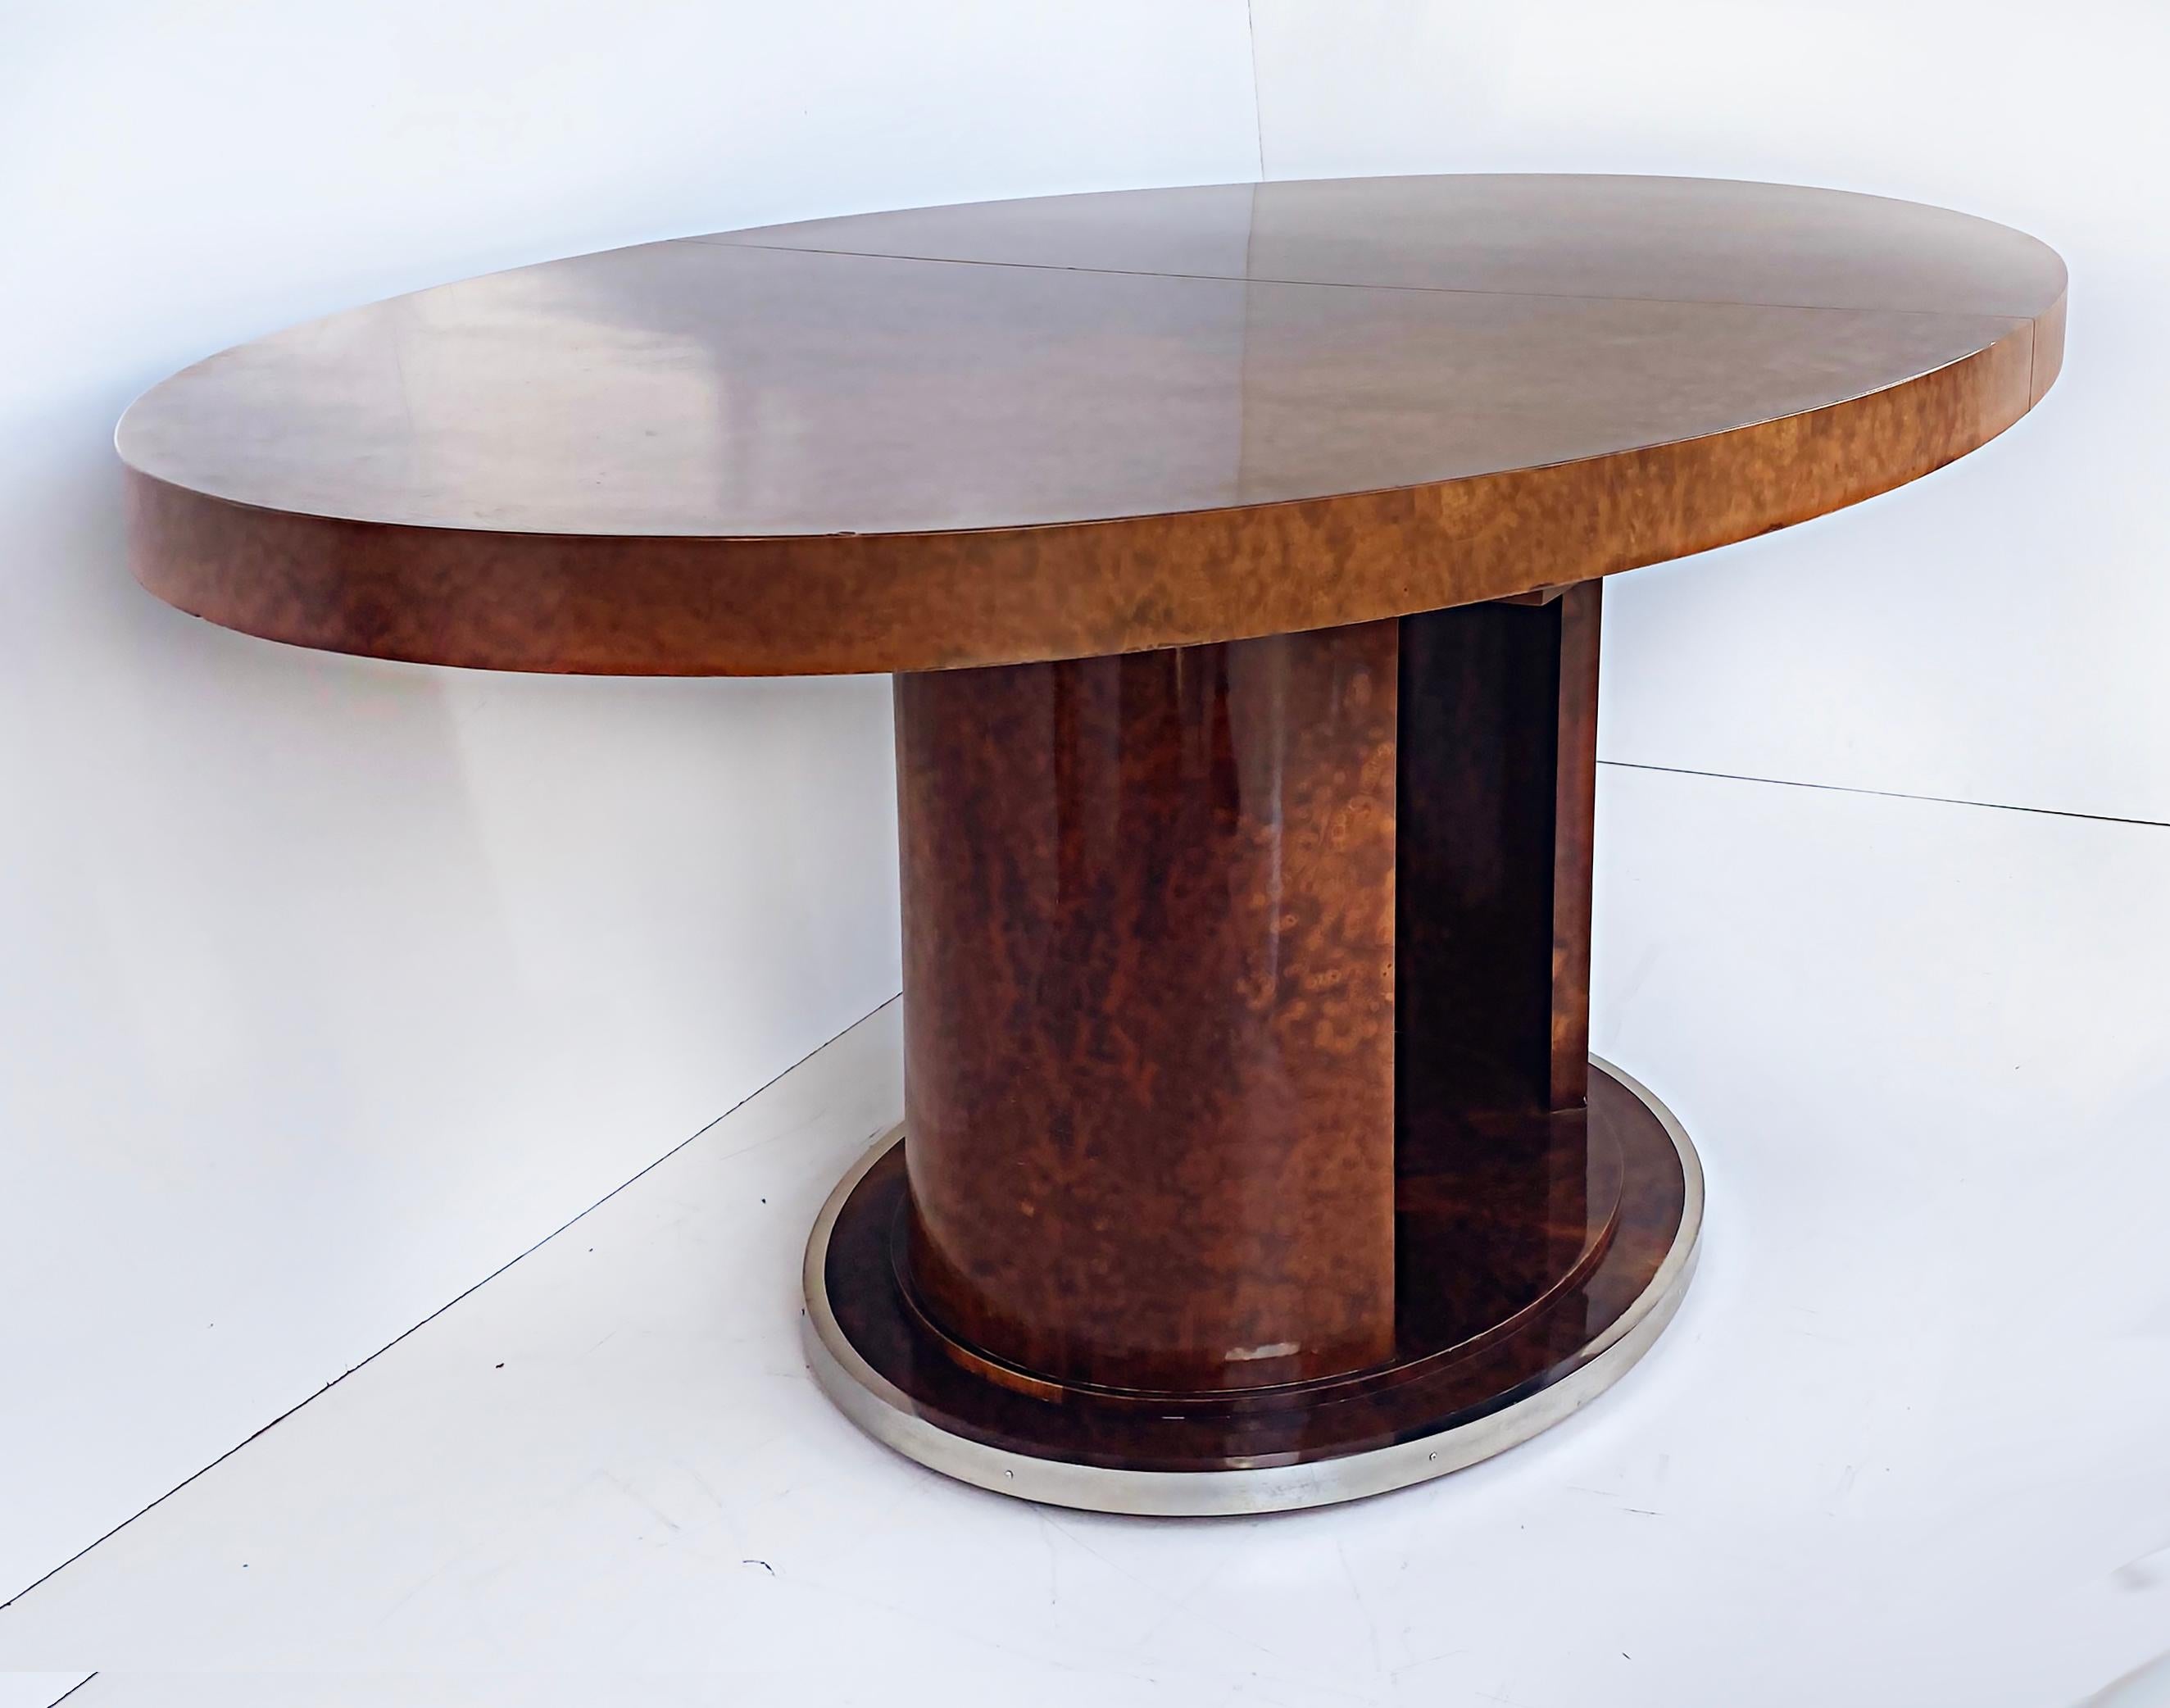 French Art Deco Rinck Paris Burlwood Dining Table 1930s, Extending Oval Pedestal In Good Condition For Sale In Miami, FL